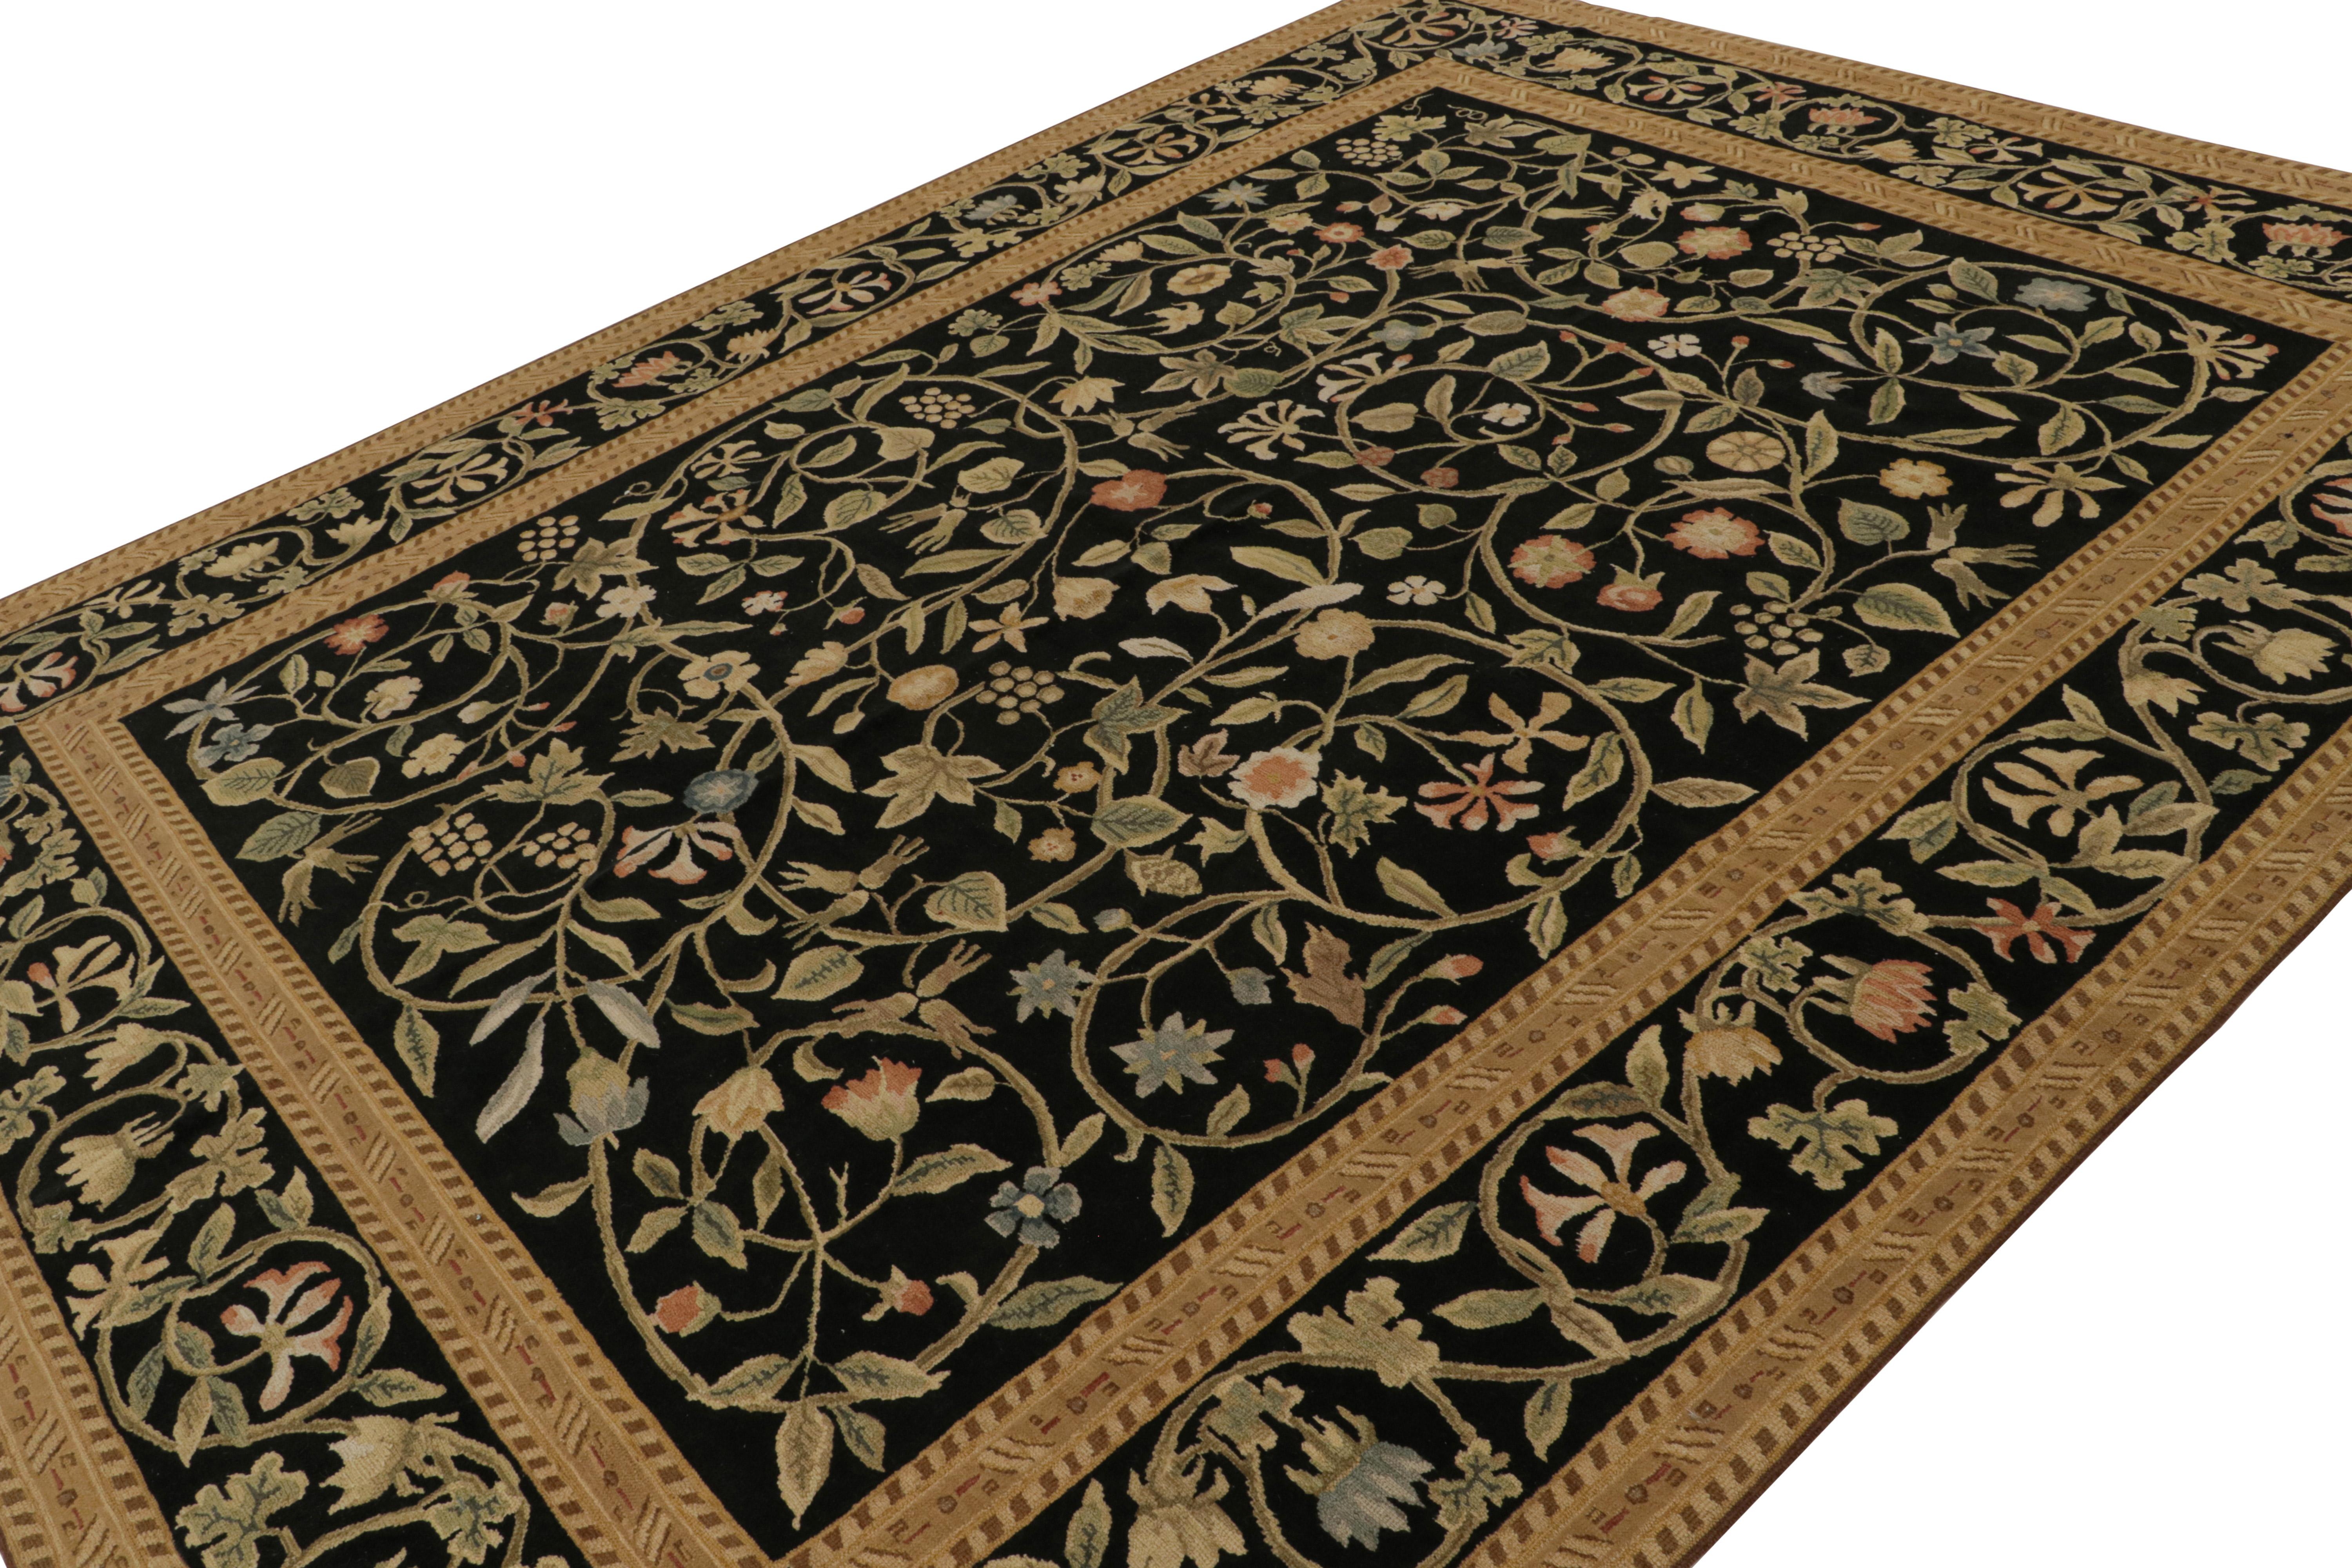 Hand-knotted in wool, this 9x11 European rug in black is the first iteration of this design to be in high-and-low texture. Featuring beige/brown, green and pink floral patterns among many other present brighter tones, this rug has been inspired by